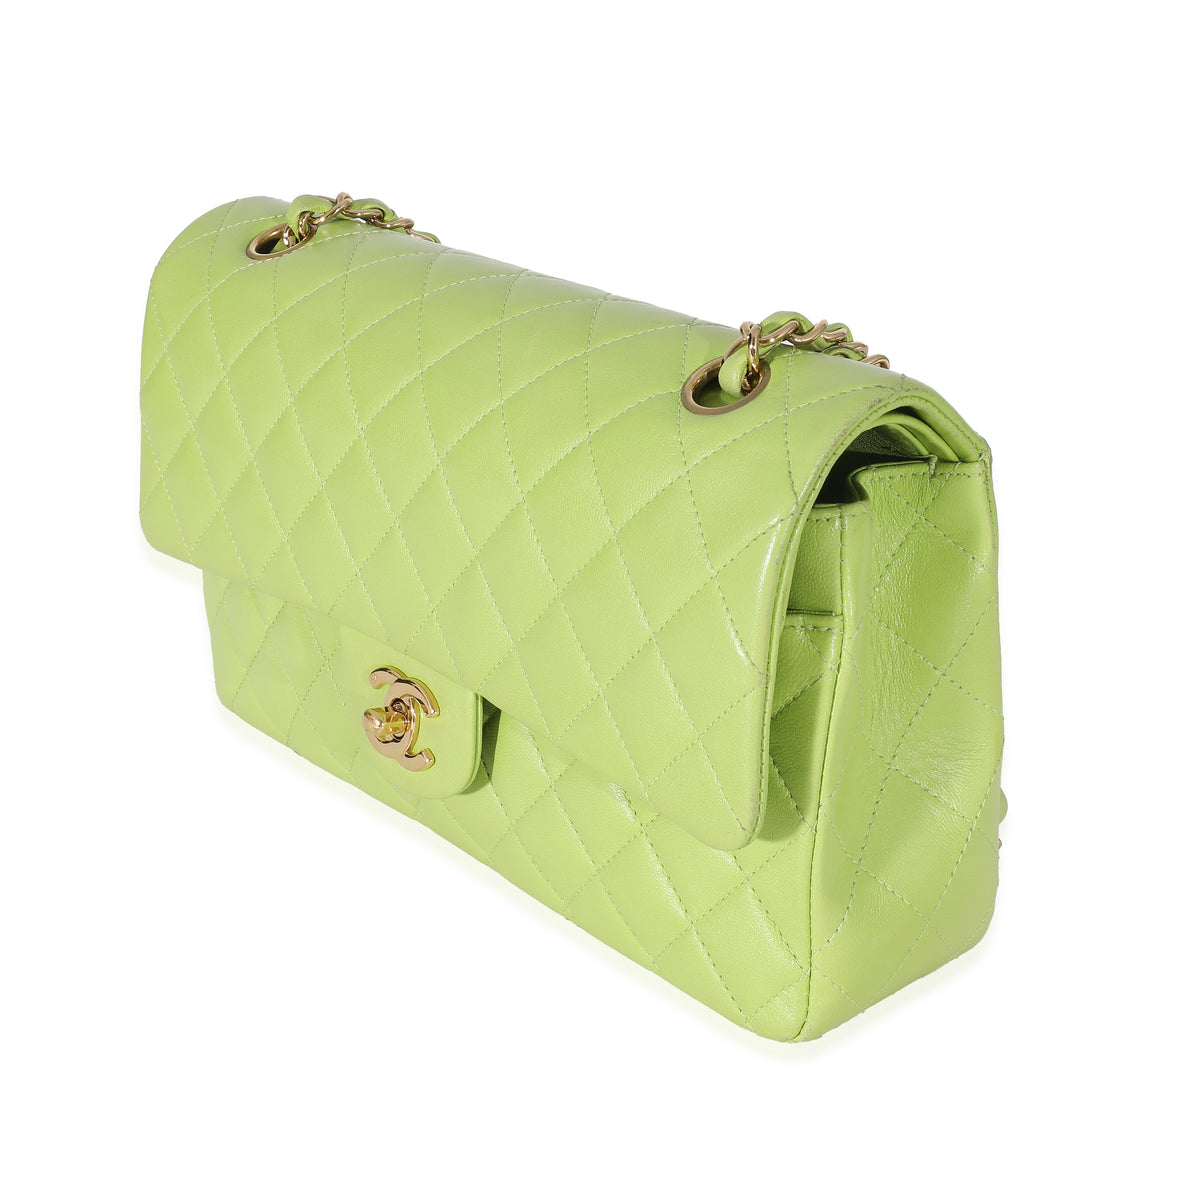 Chanel Lime Green Quilted Double Flap Bag